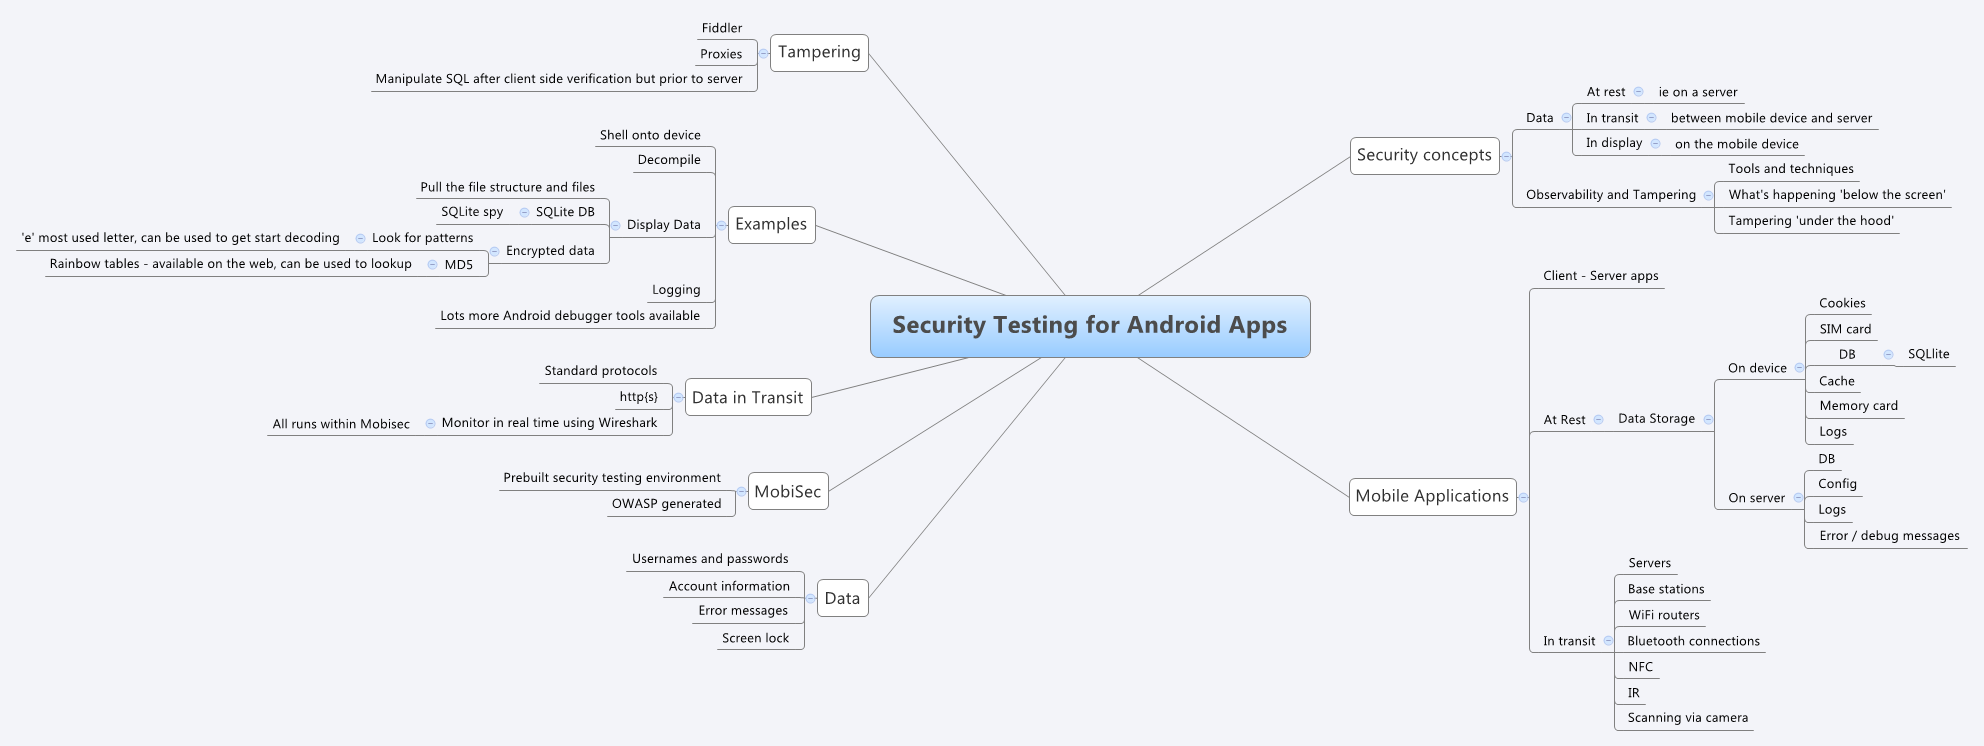 Security Testing for Android Apps